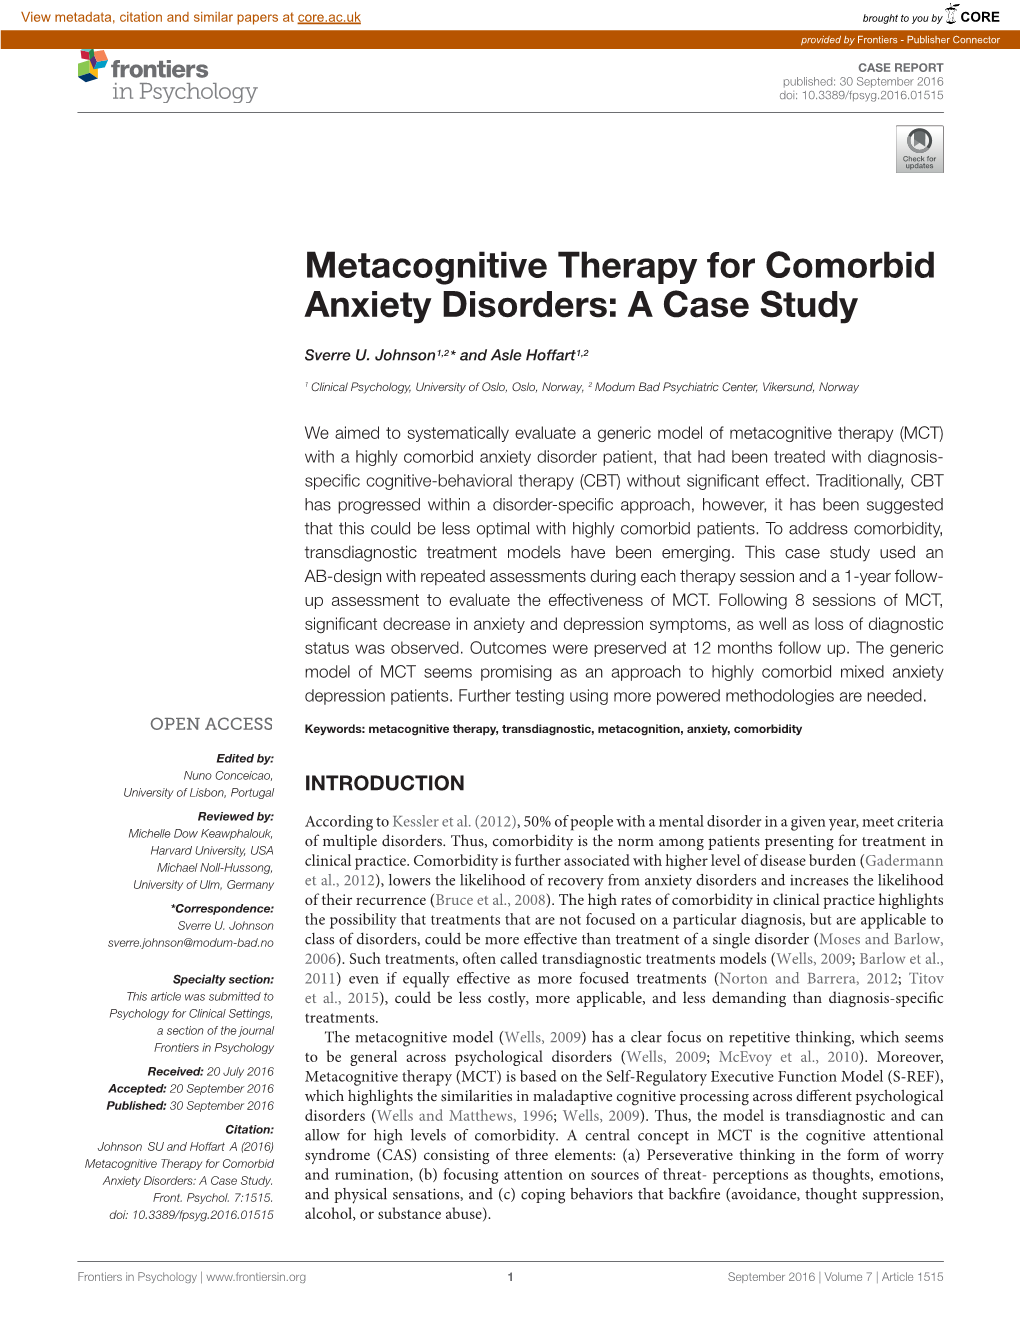 Metacognitive Therapy for Comorbid Anxiety Disorders: a Case Study